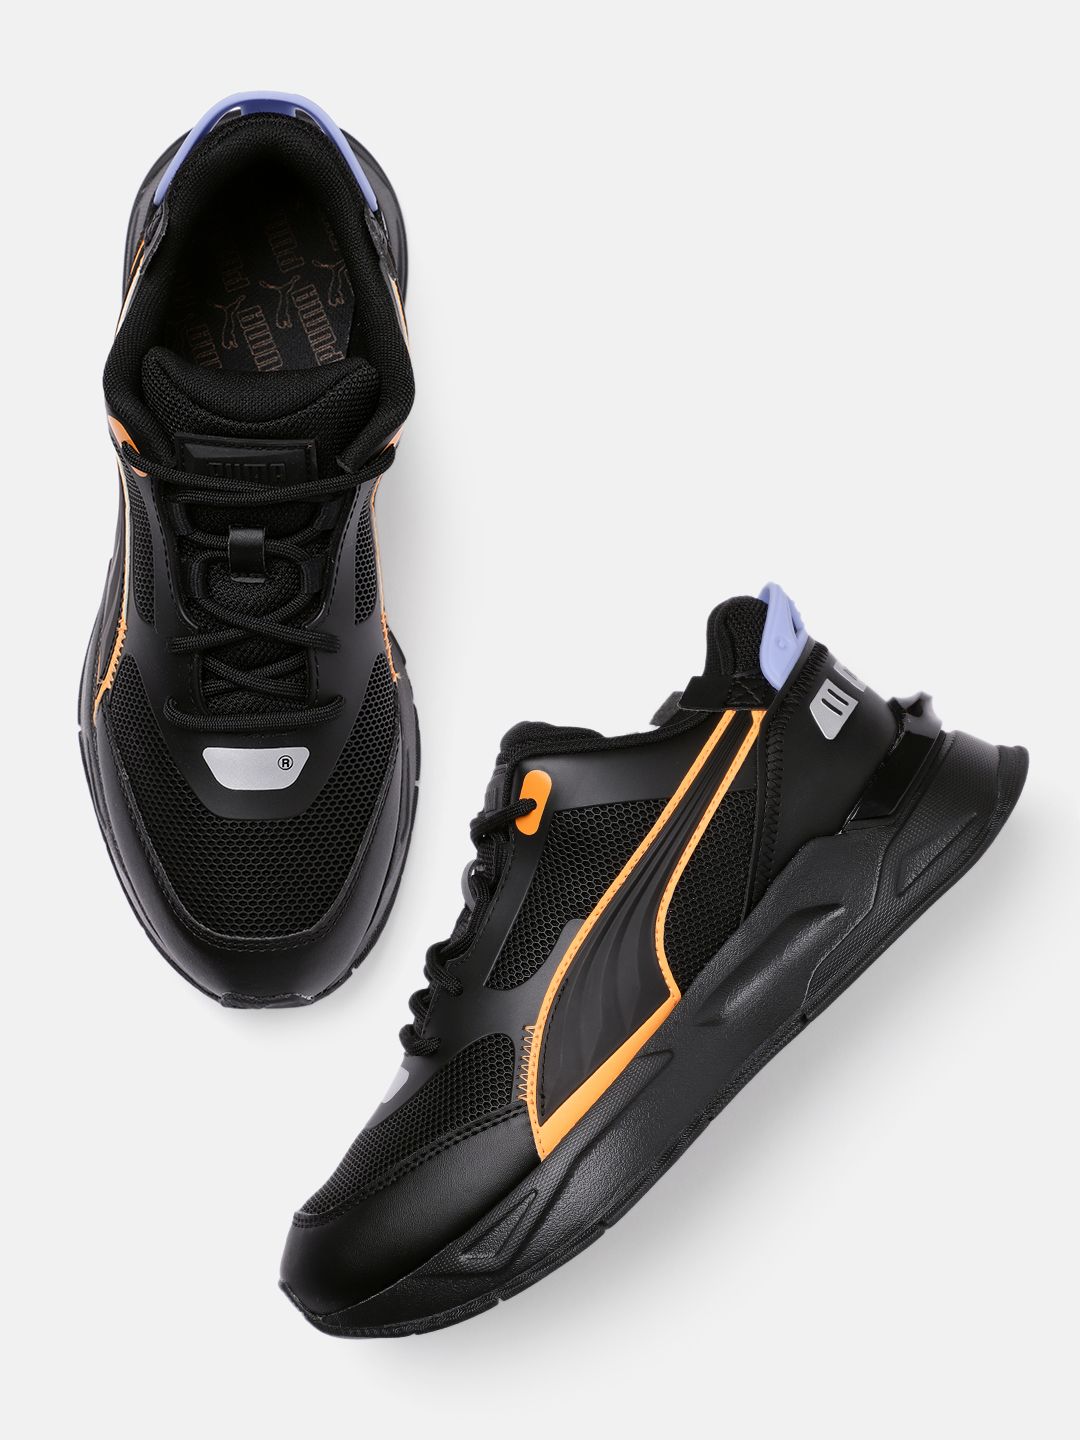 Puma Unisex Black Mirage Sport Tech Laser Tag Sneakers Price in India